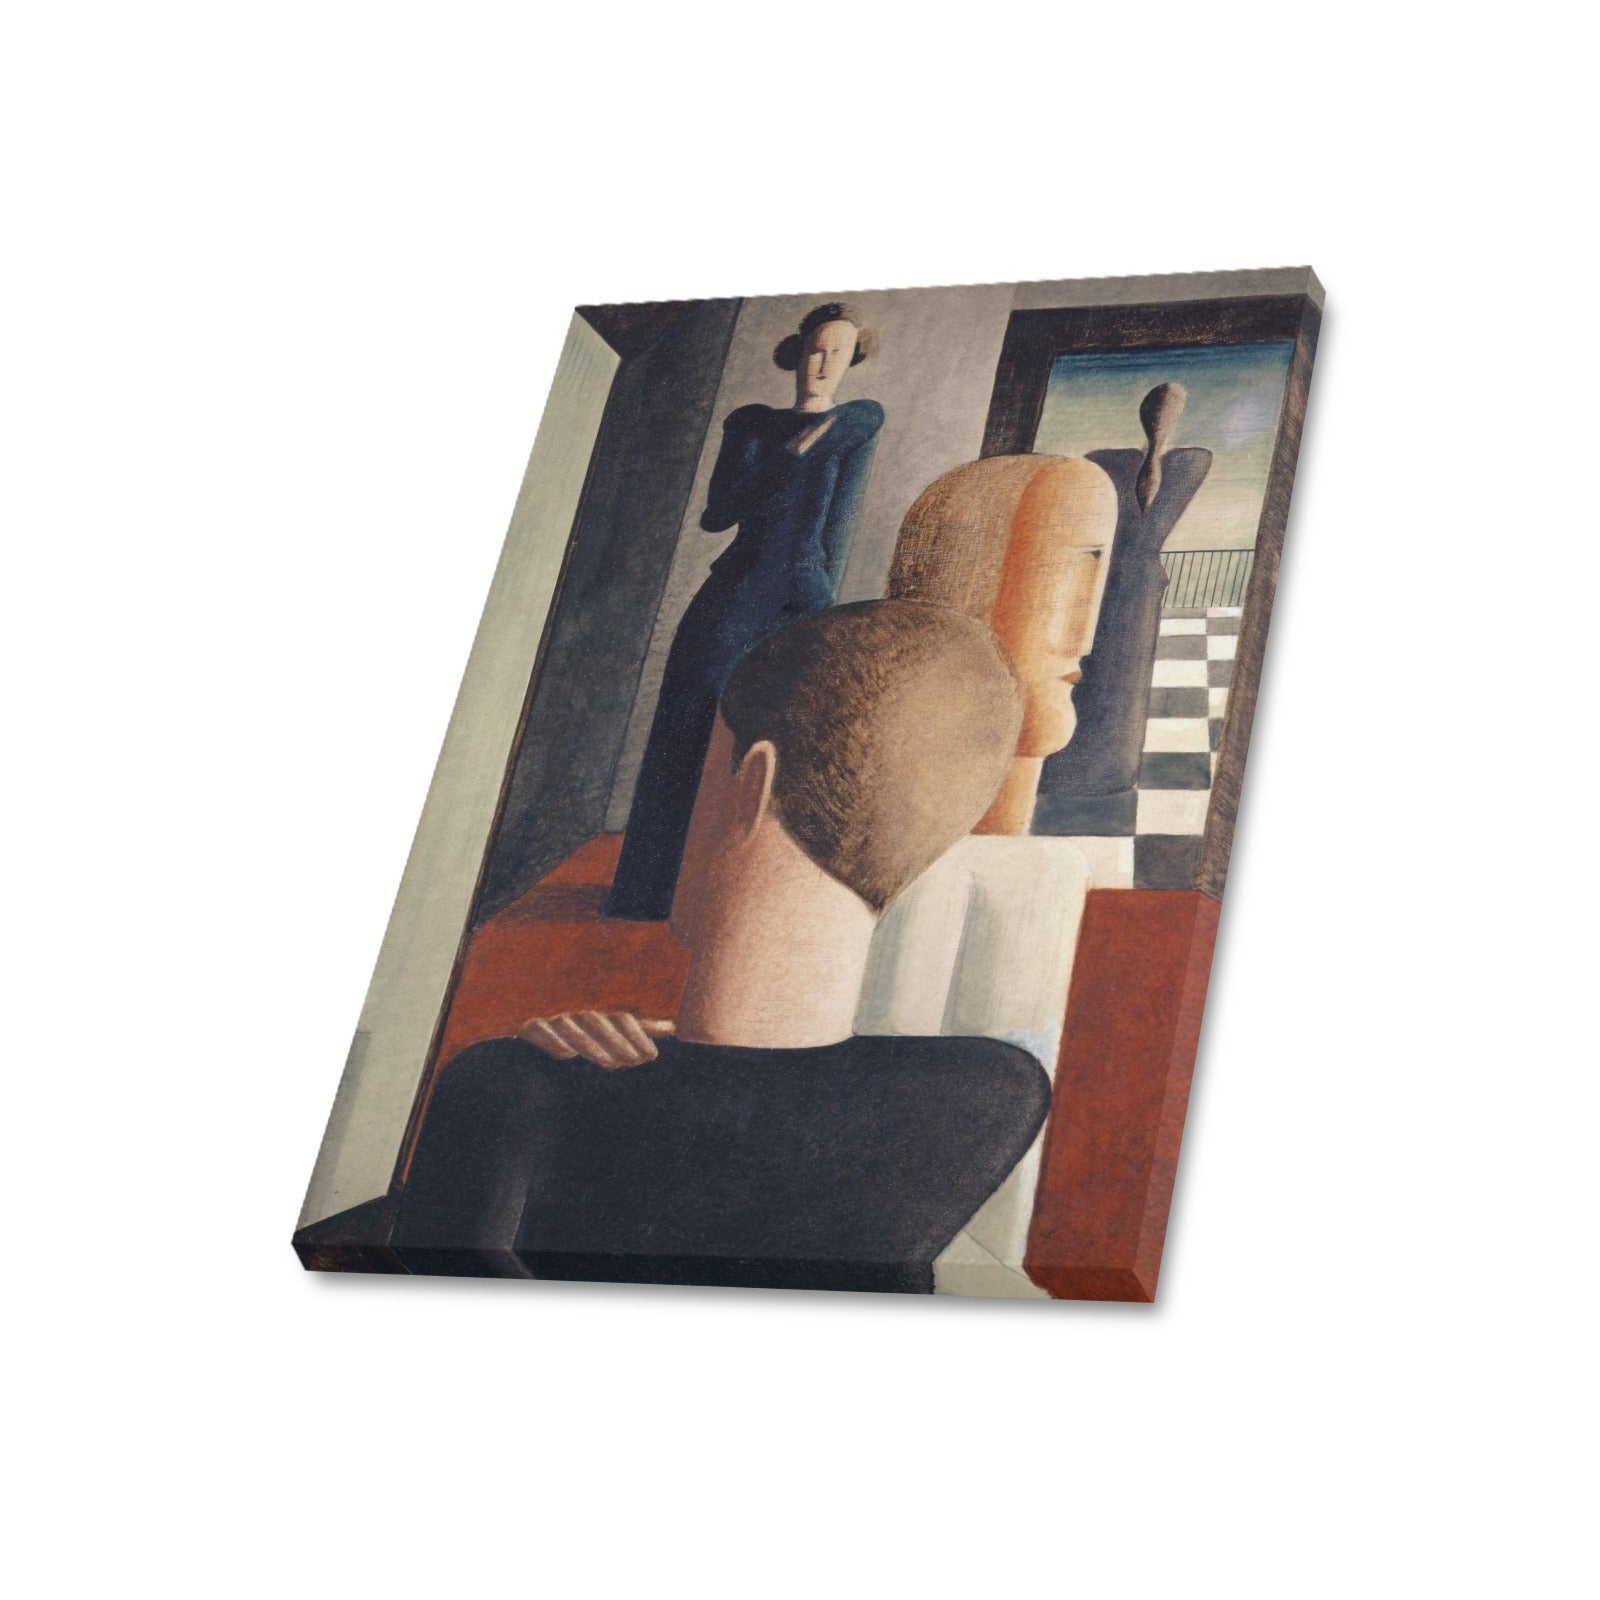 OSKAR SCHLEMMER - INTERIOR WITH FIVE FIGURES - WRAPPED CANVAS PRINT 20" x 24"